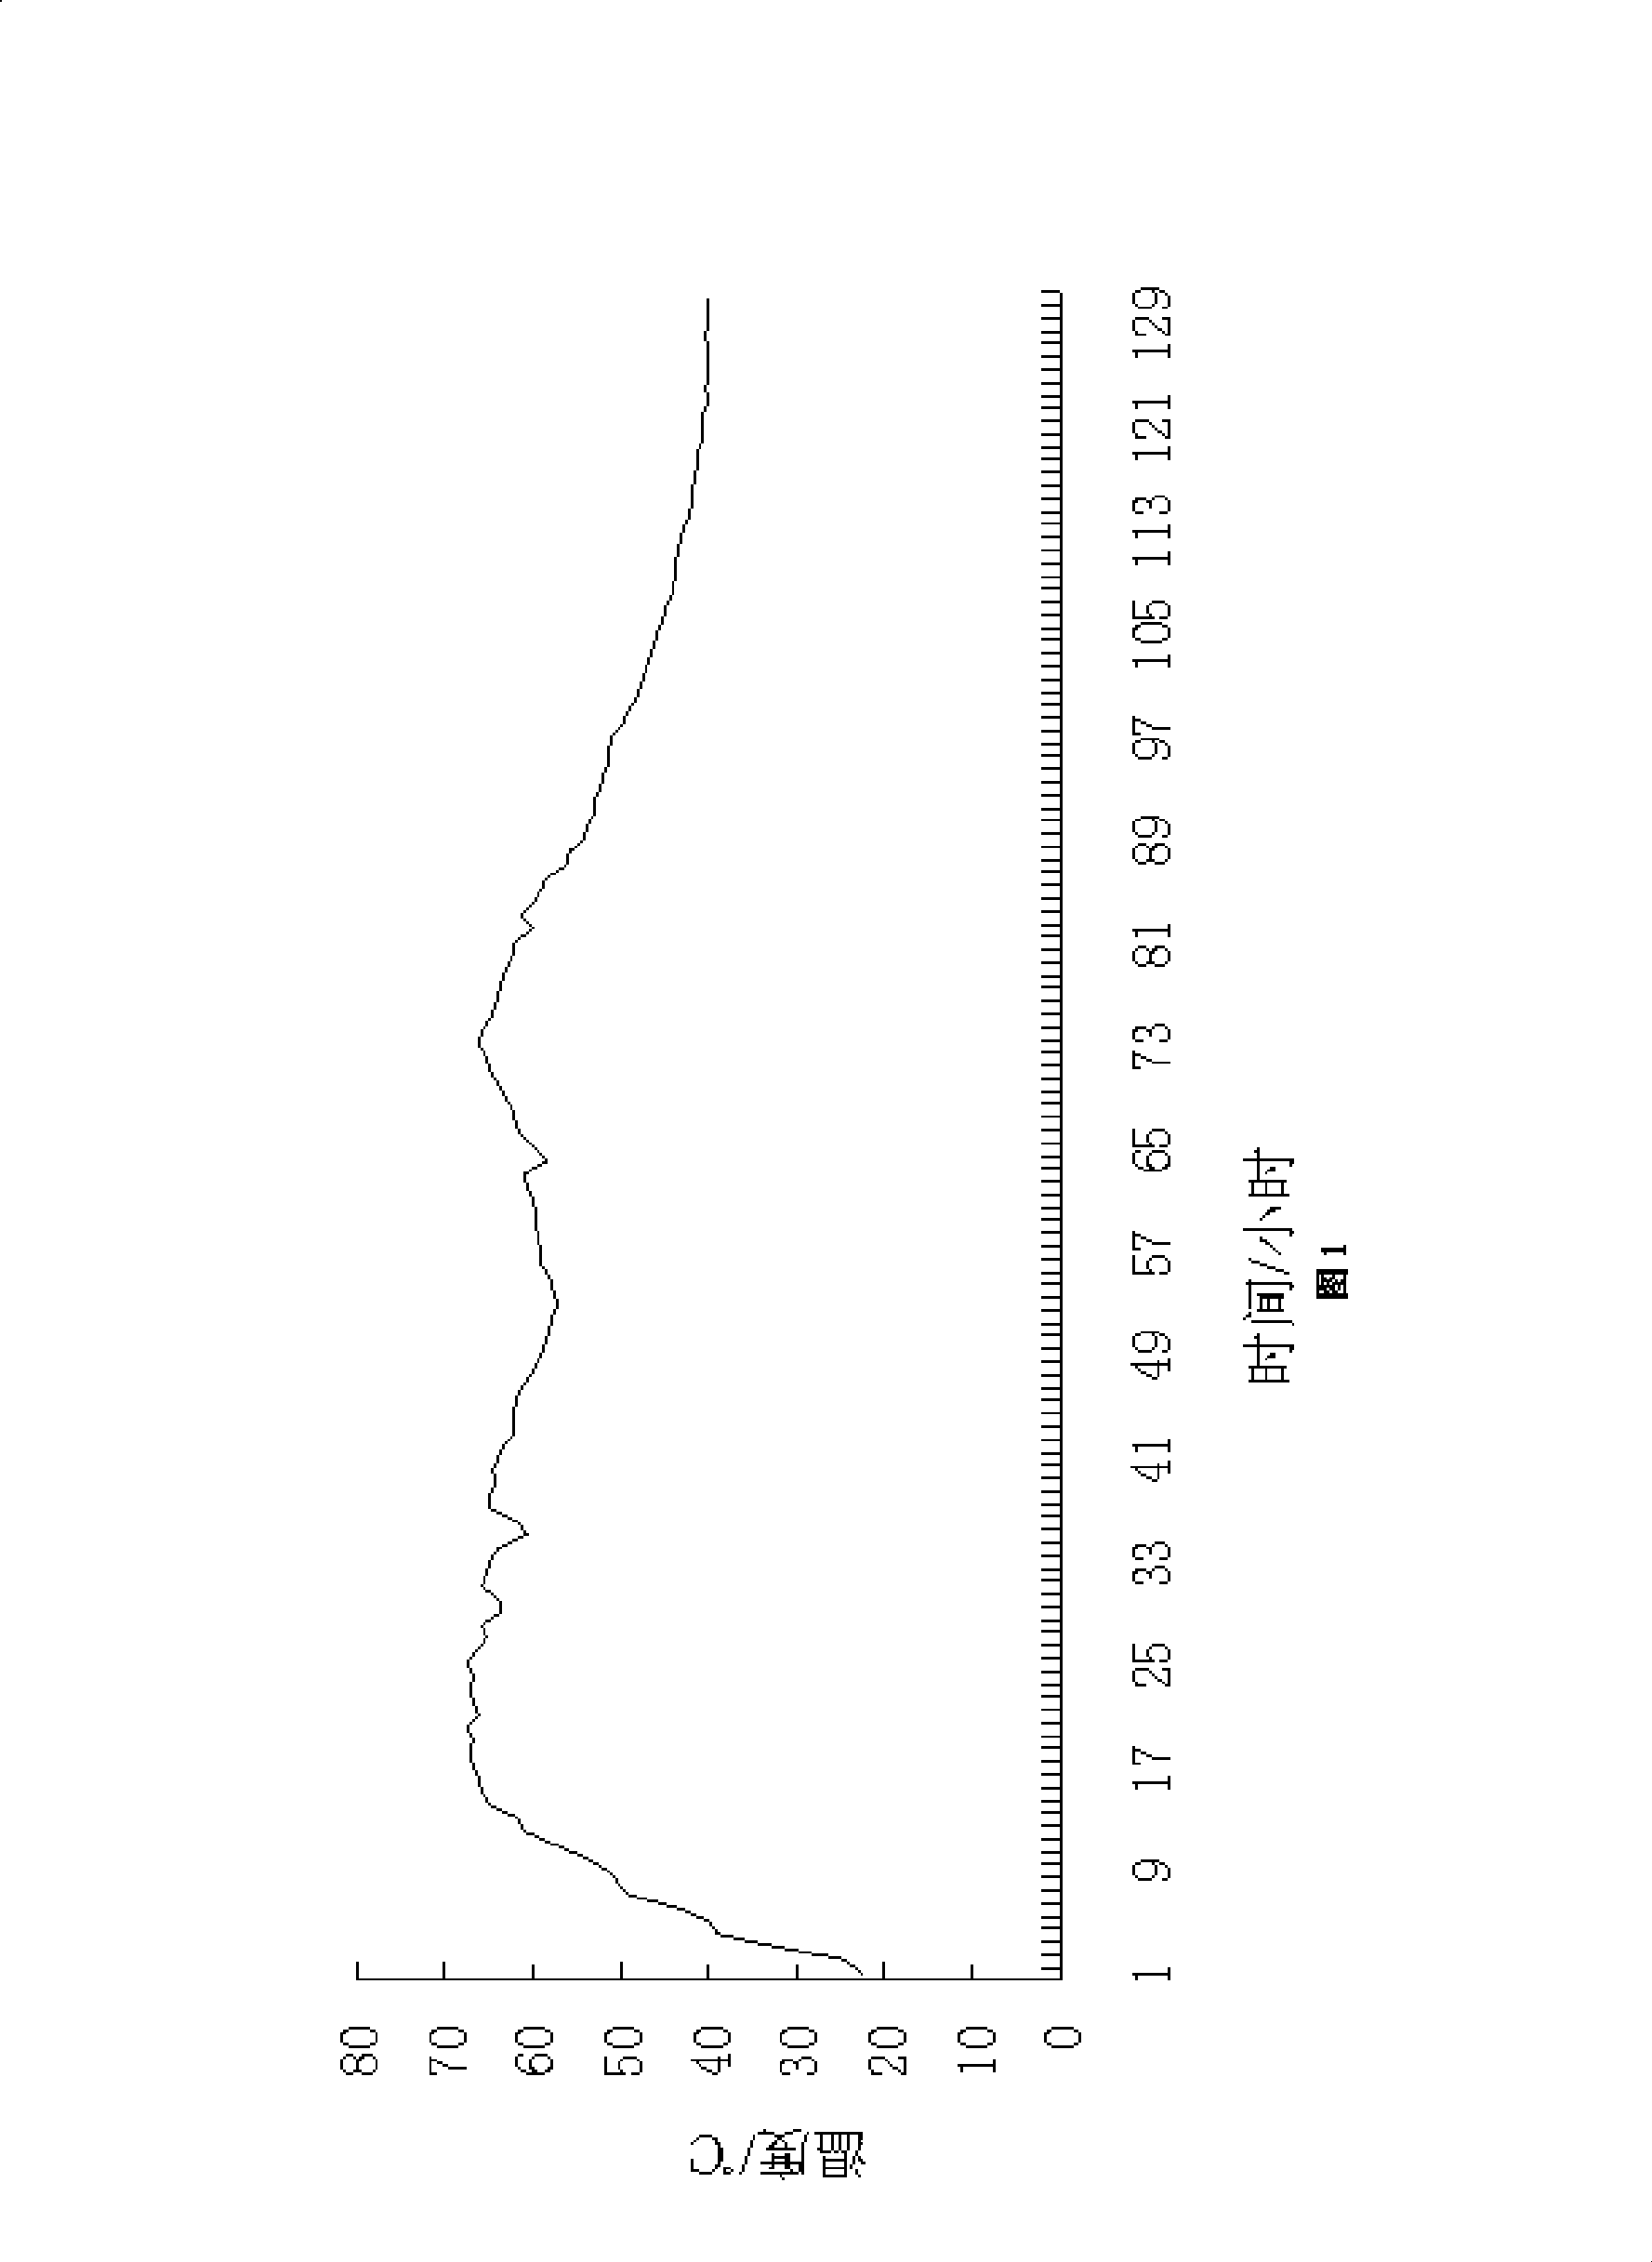 Organic fertilizer for tobacco and preparation method thereof